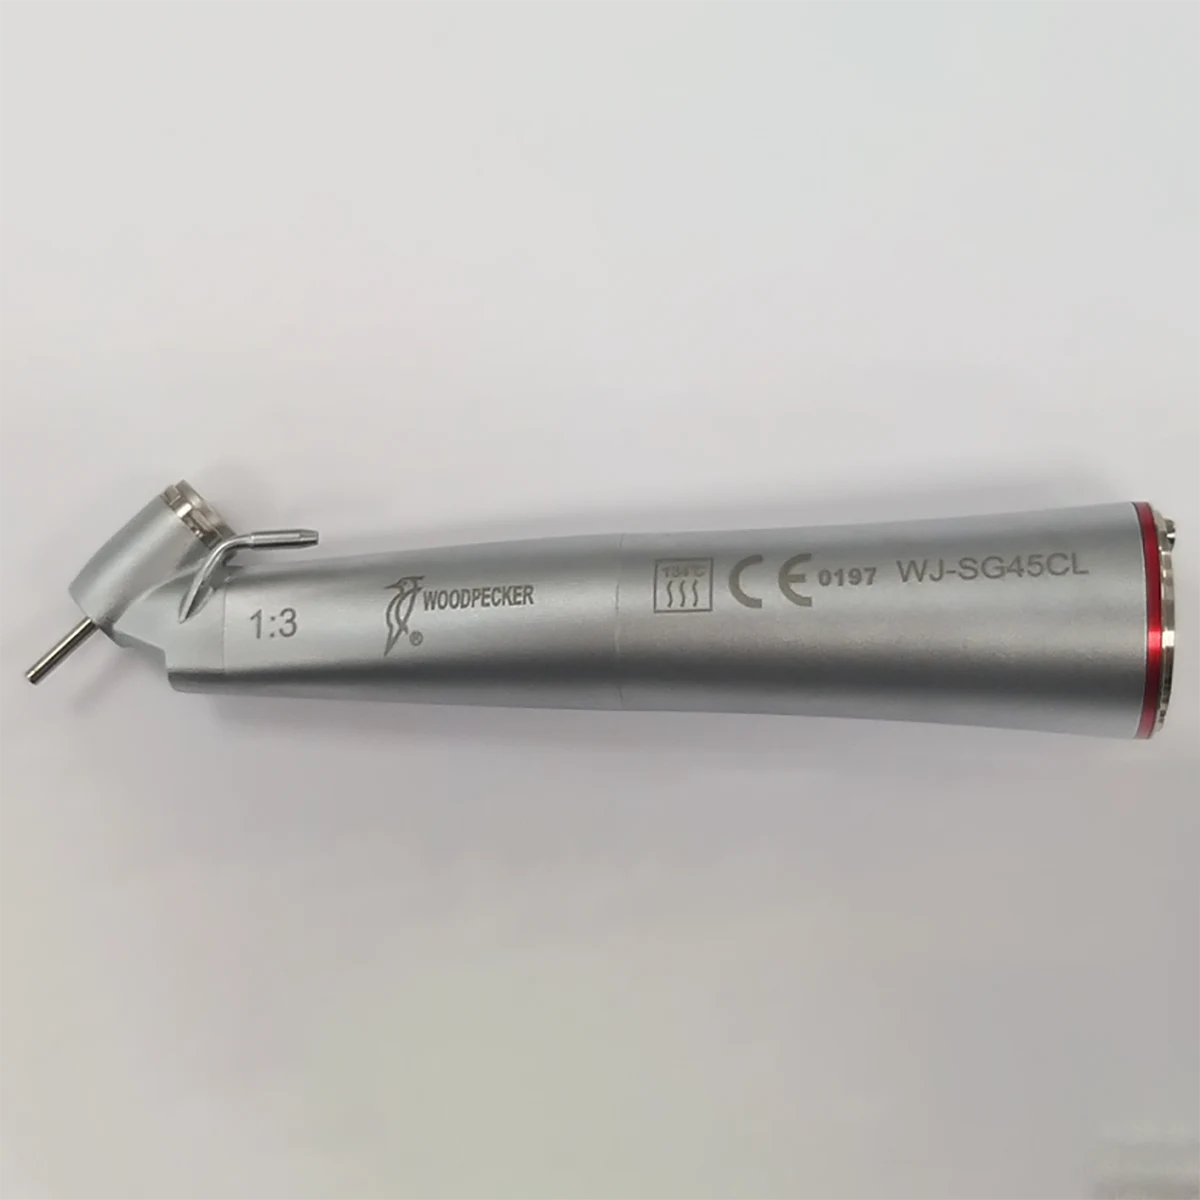 DTE Woodpecker 1:3 Contra angle external water surgical handpiece (6803926220899)